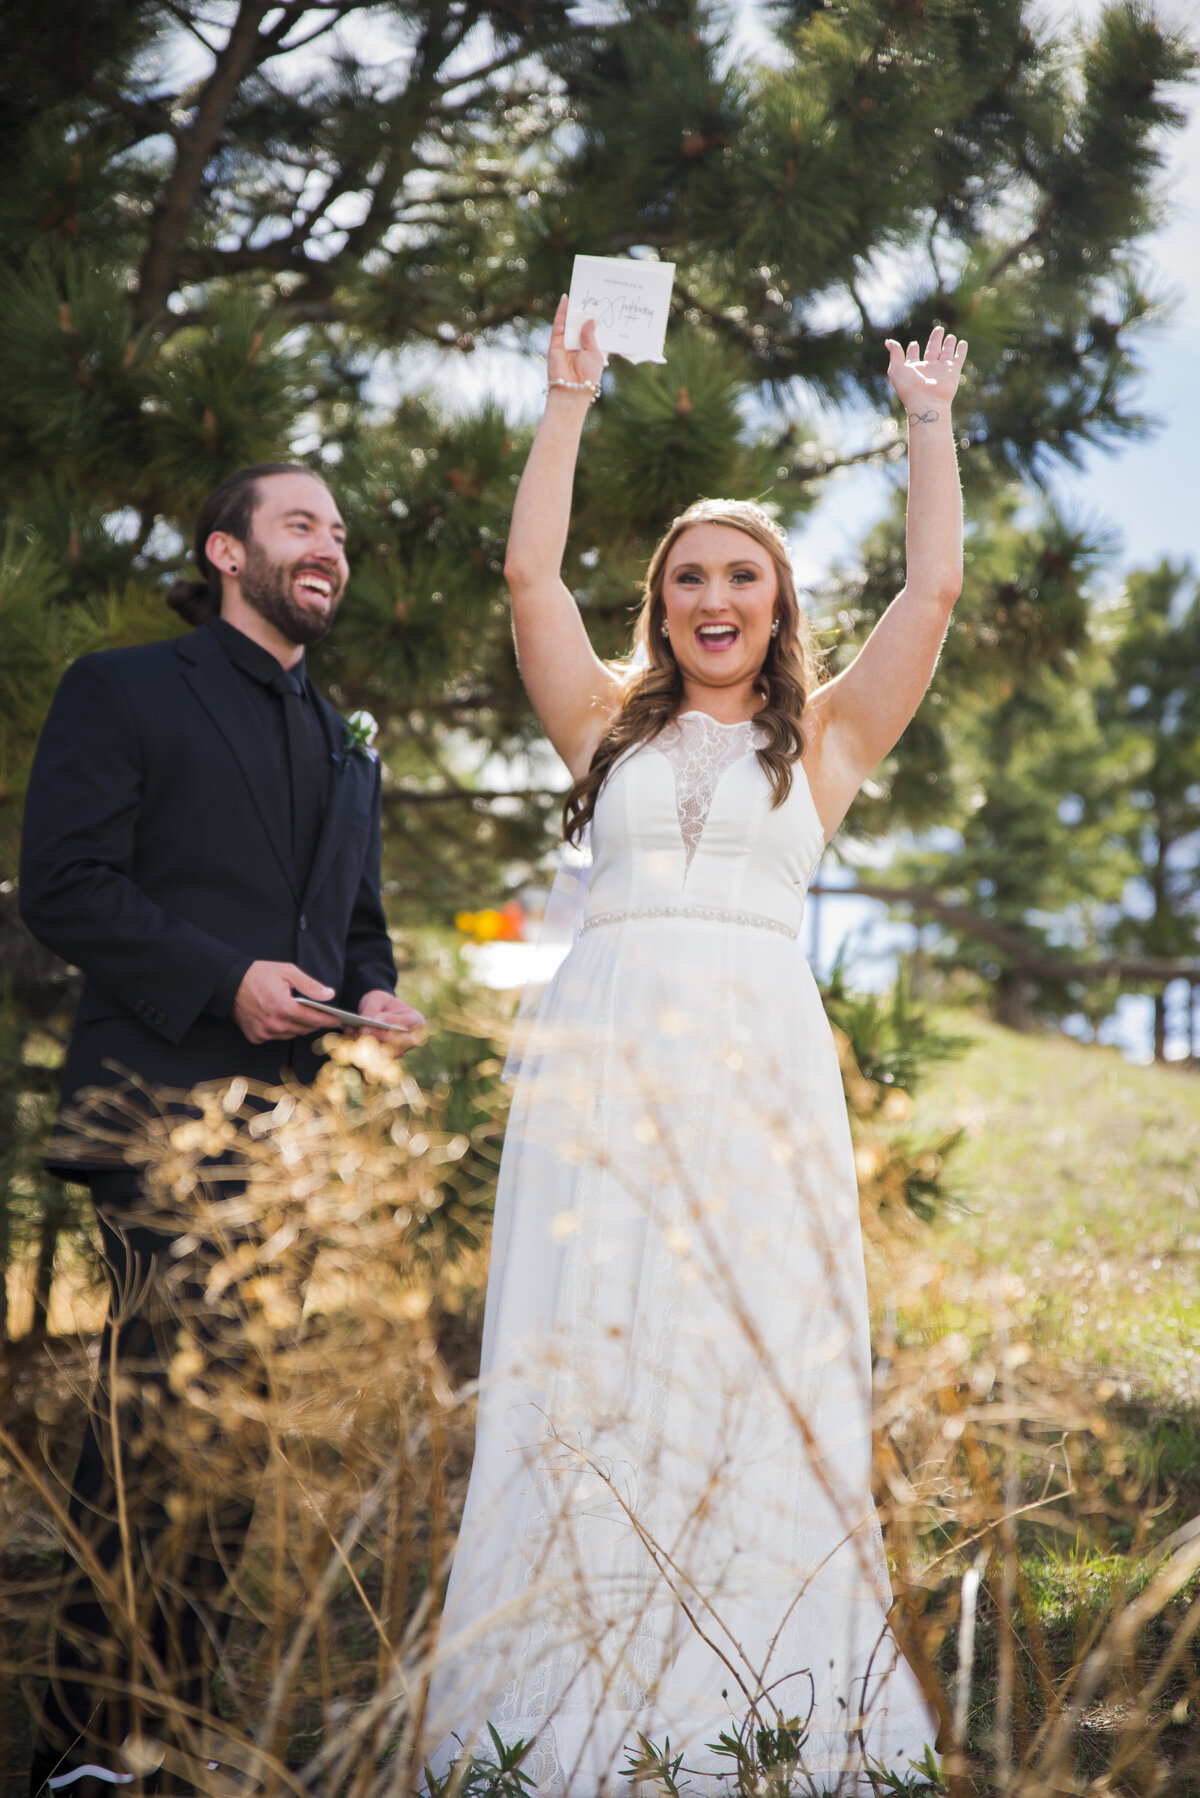 A groom smiles at his bride as she lifts her hands up in celebration.